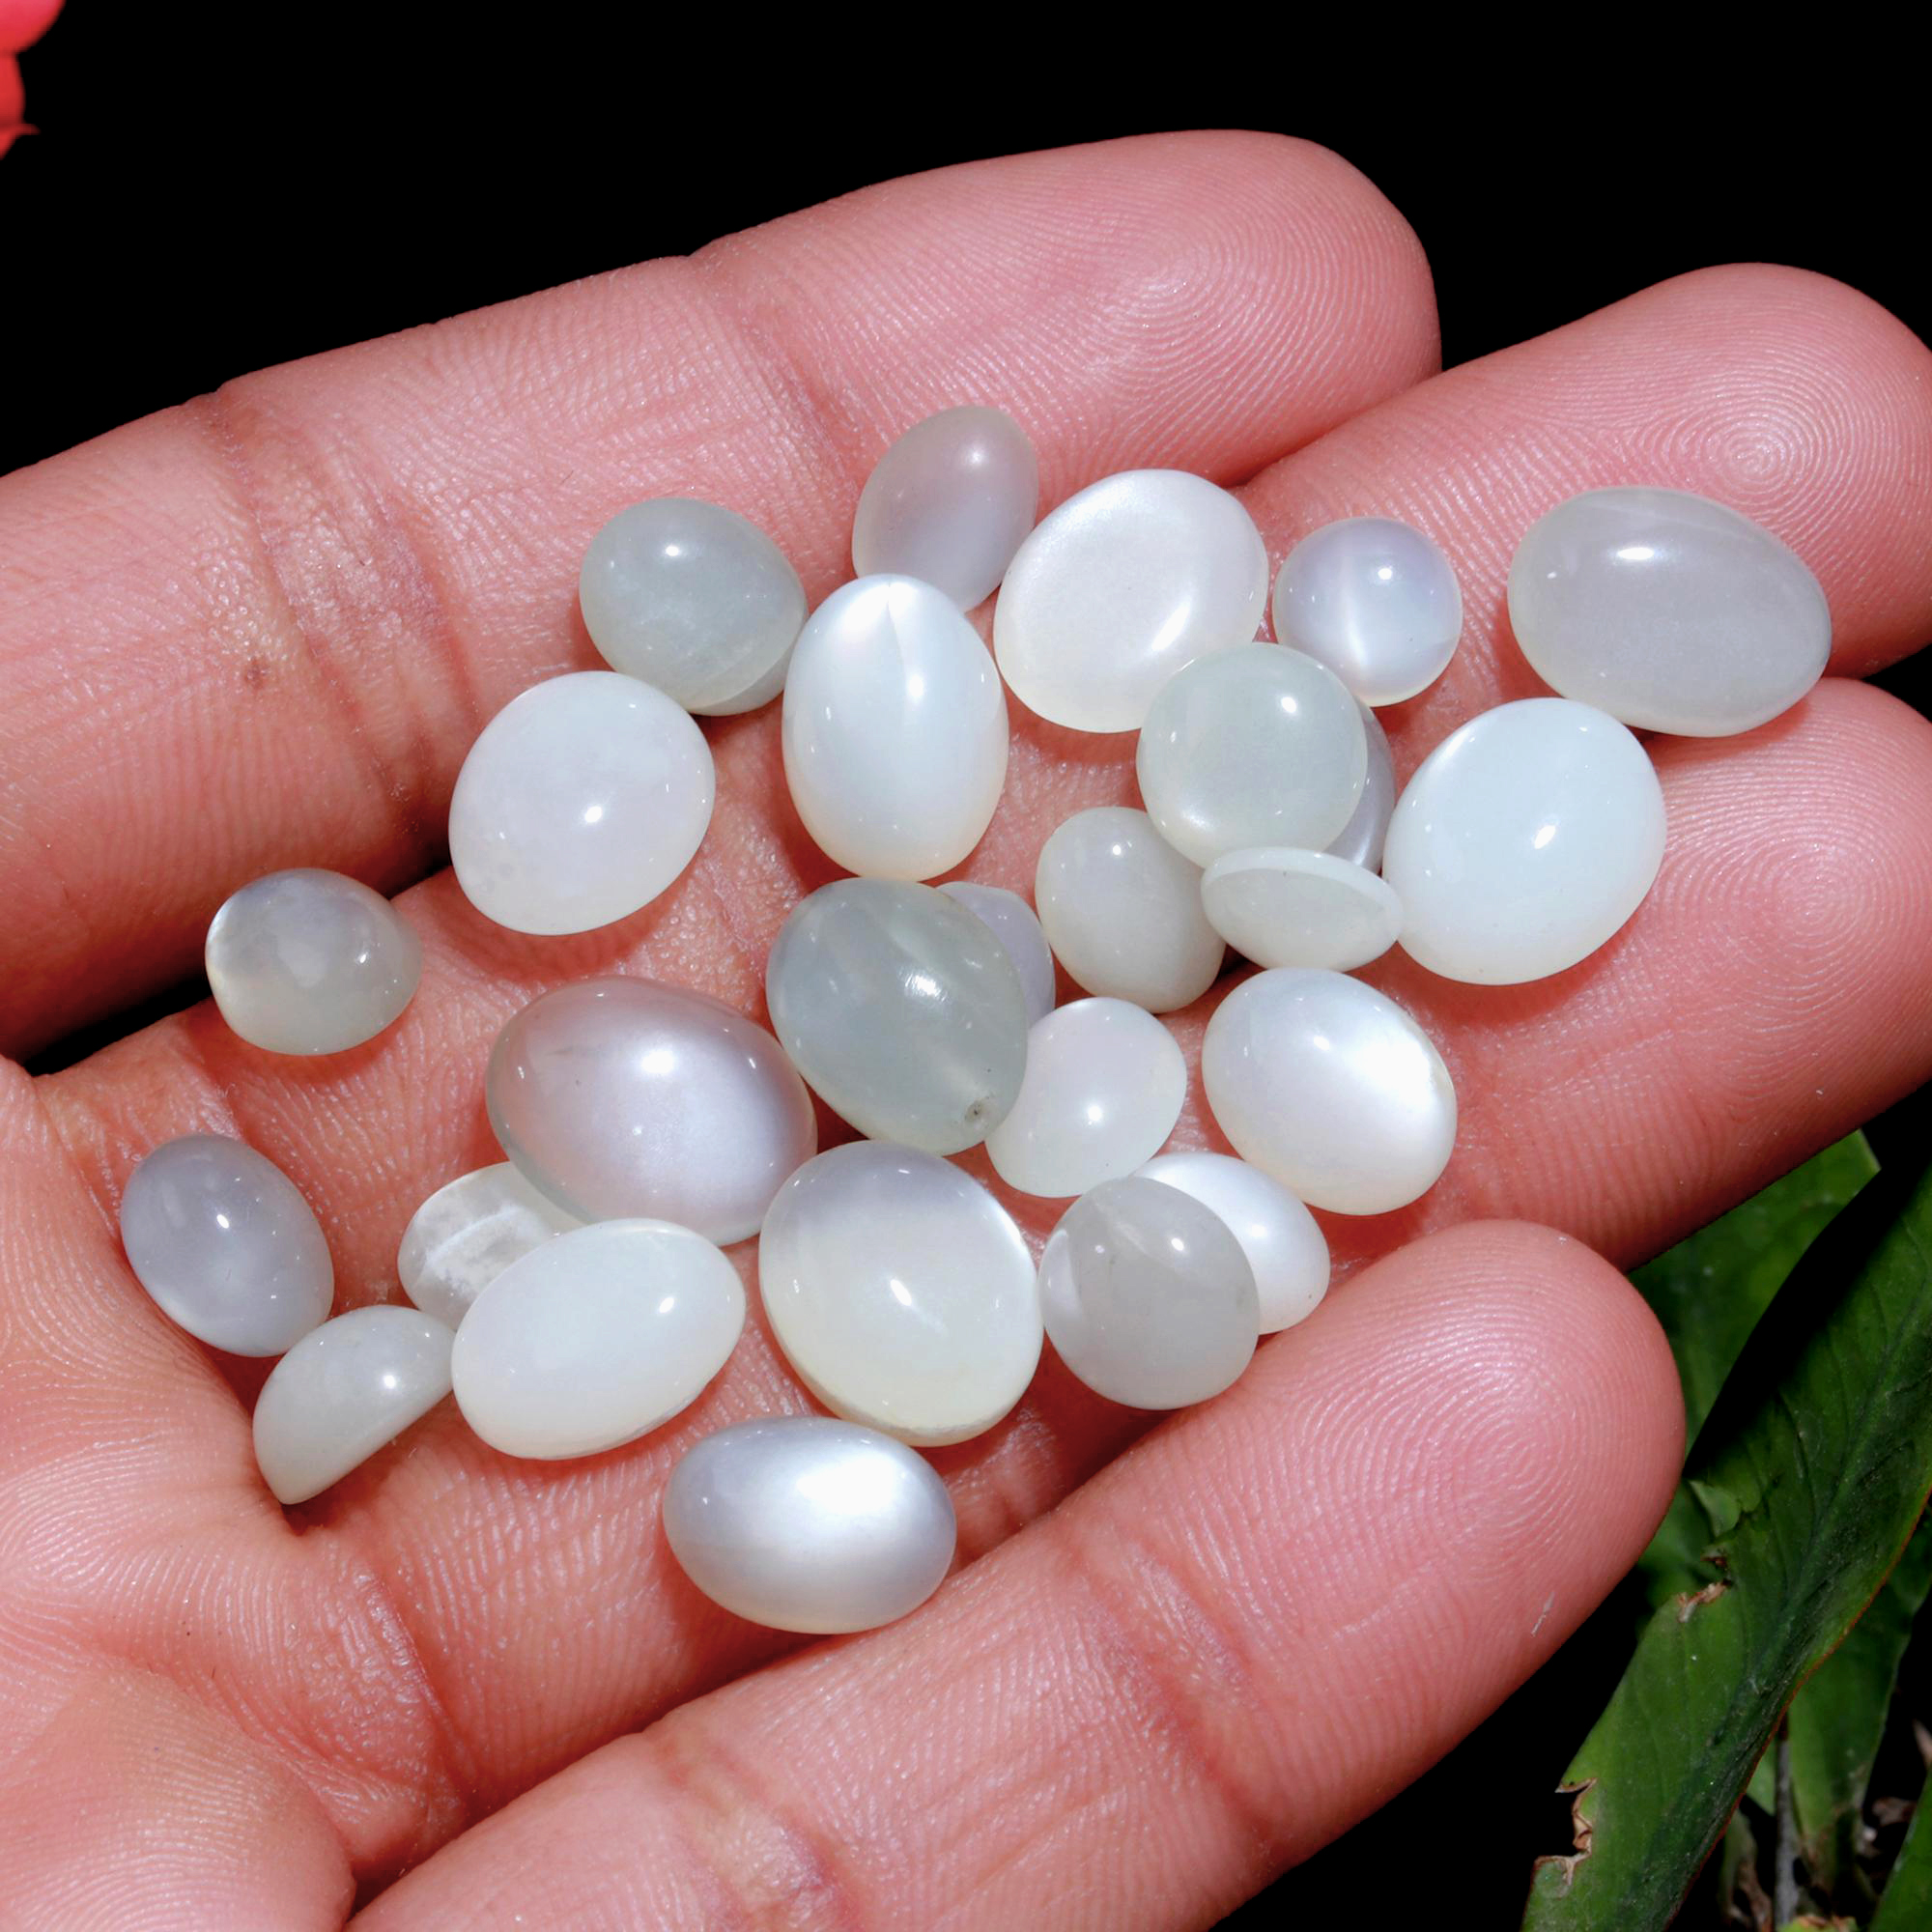 34 Pcs. 74Cts. Natural Grey Rainbow Moonstone polished Mix Cabochon Wholesale Loose Lot Size 12x9 7x7mm Gemstone for jewelry